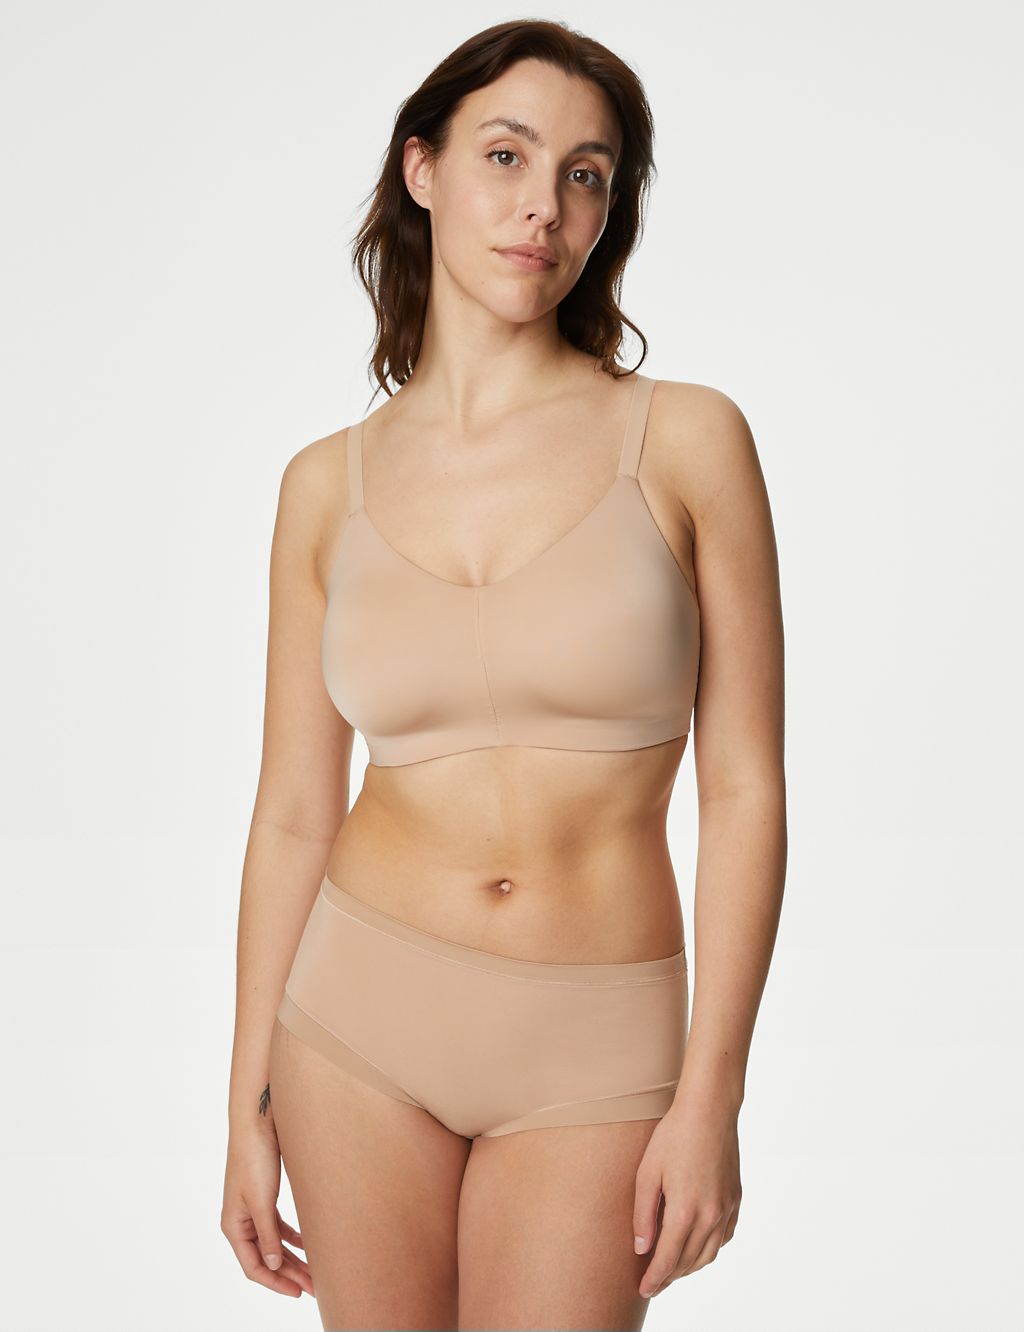 Flexifit™ Non-Wired Full Cup Bra F-H 4 of 8